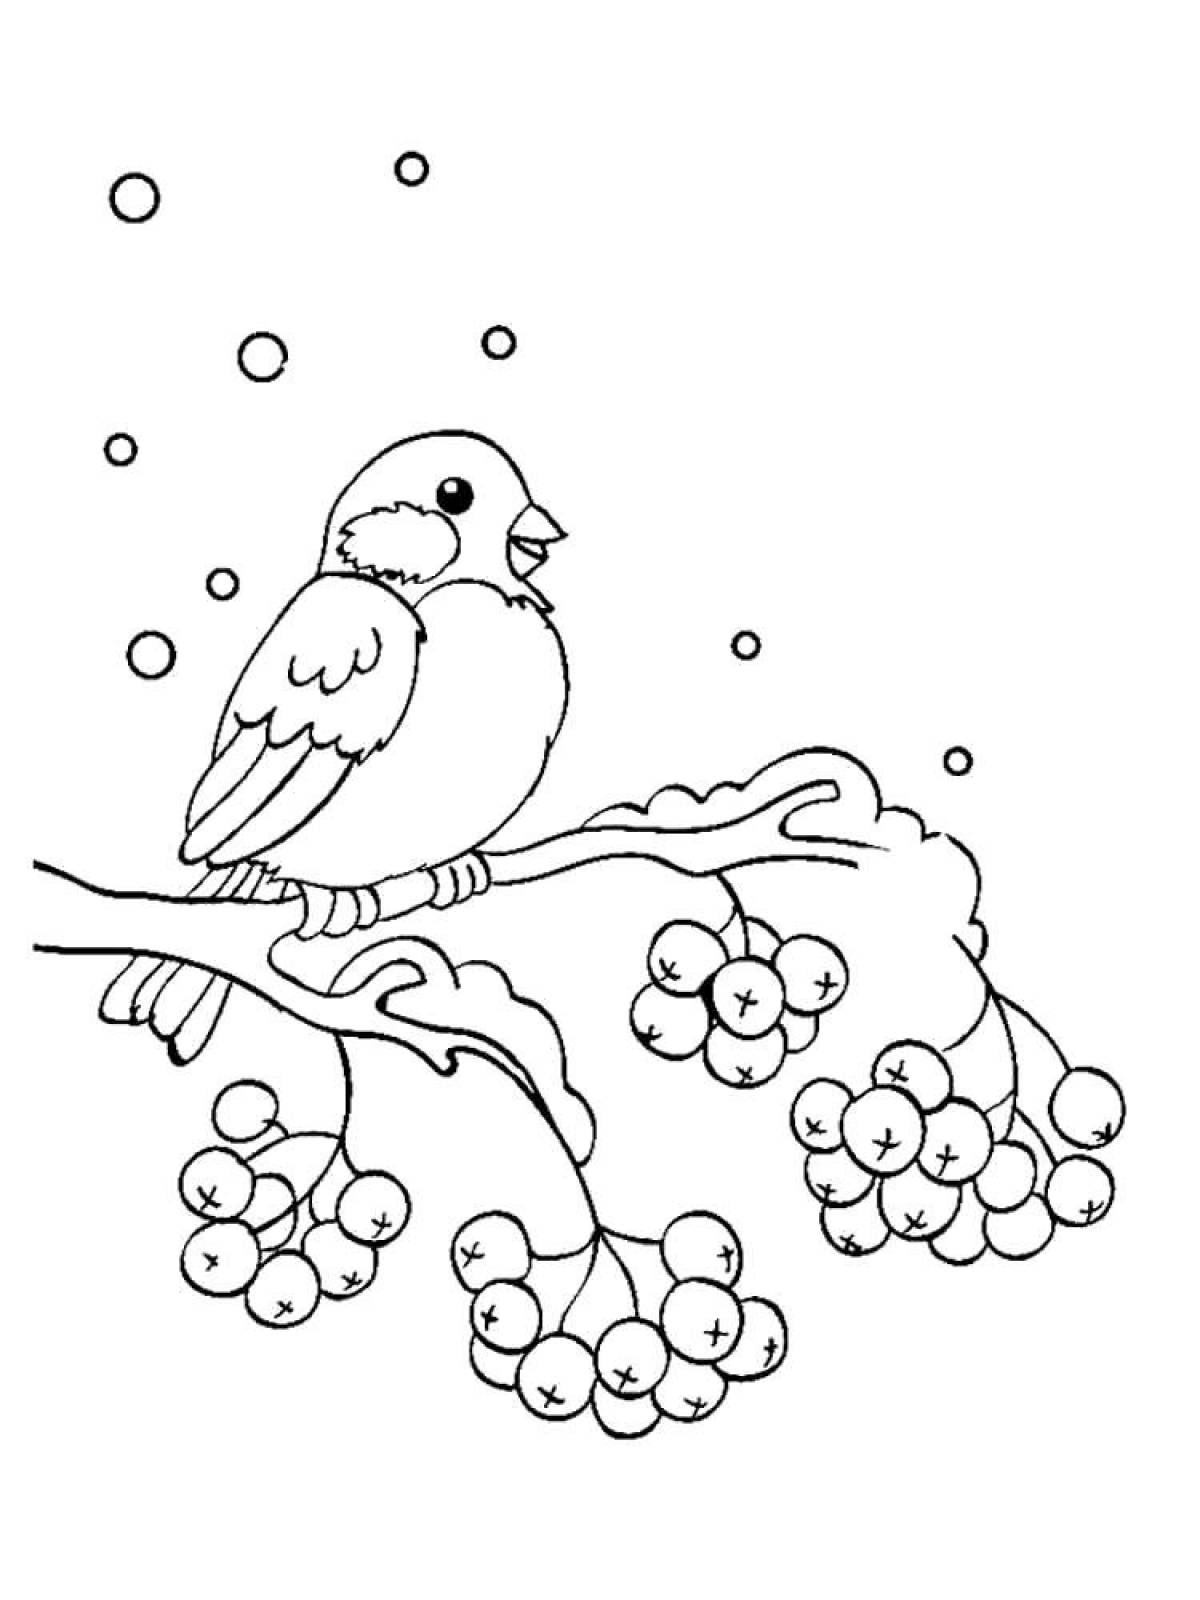 Witty Bullfinch Coloring Page for Toddlers